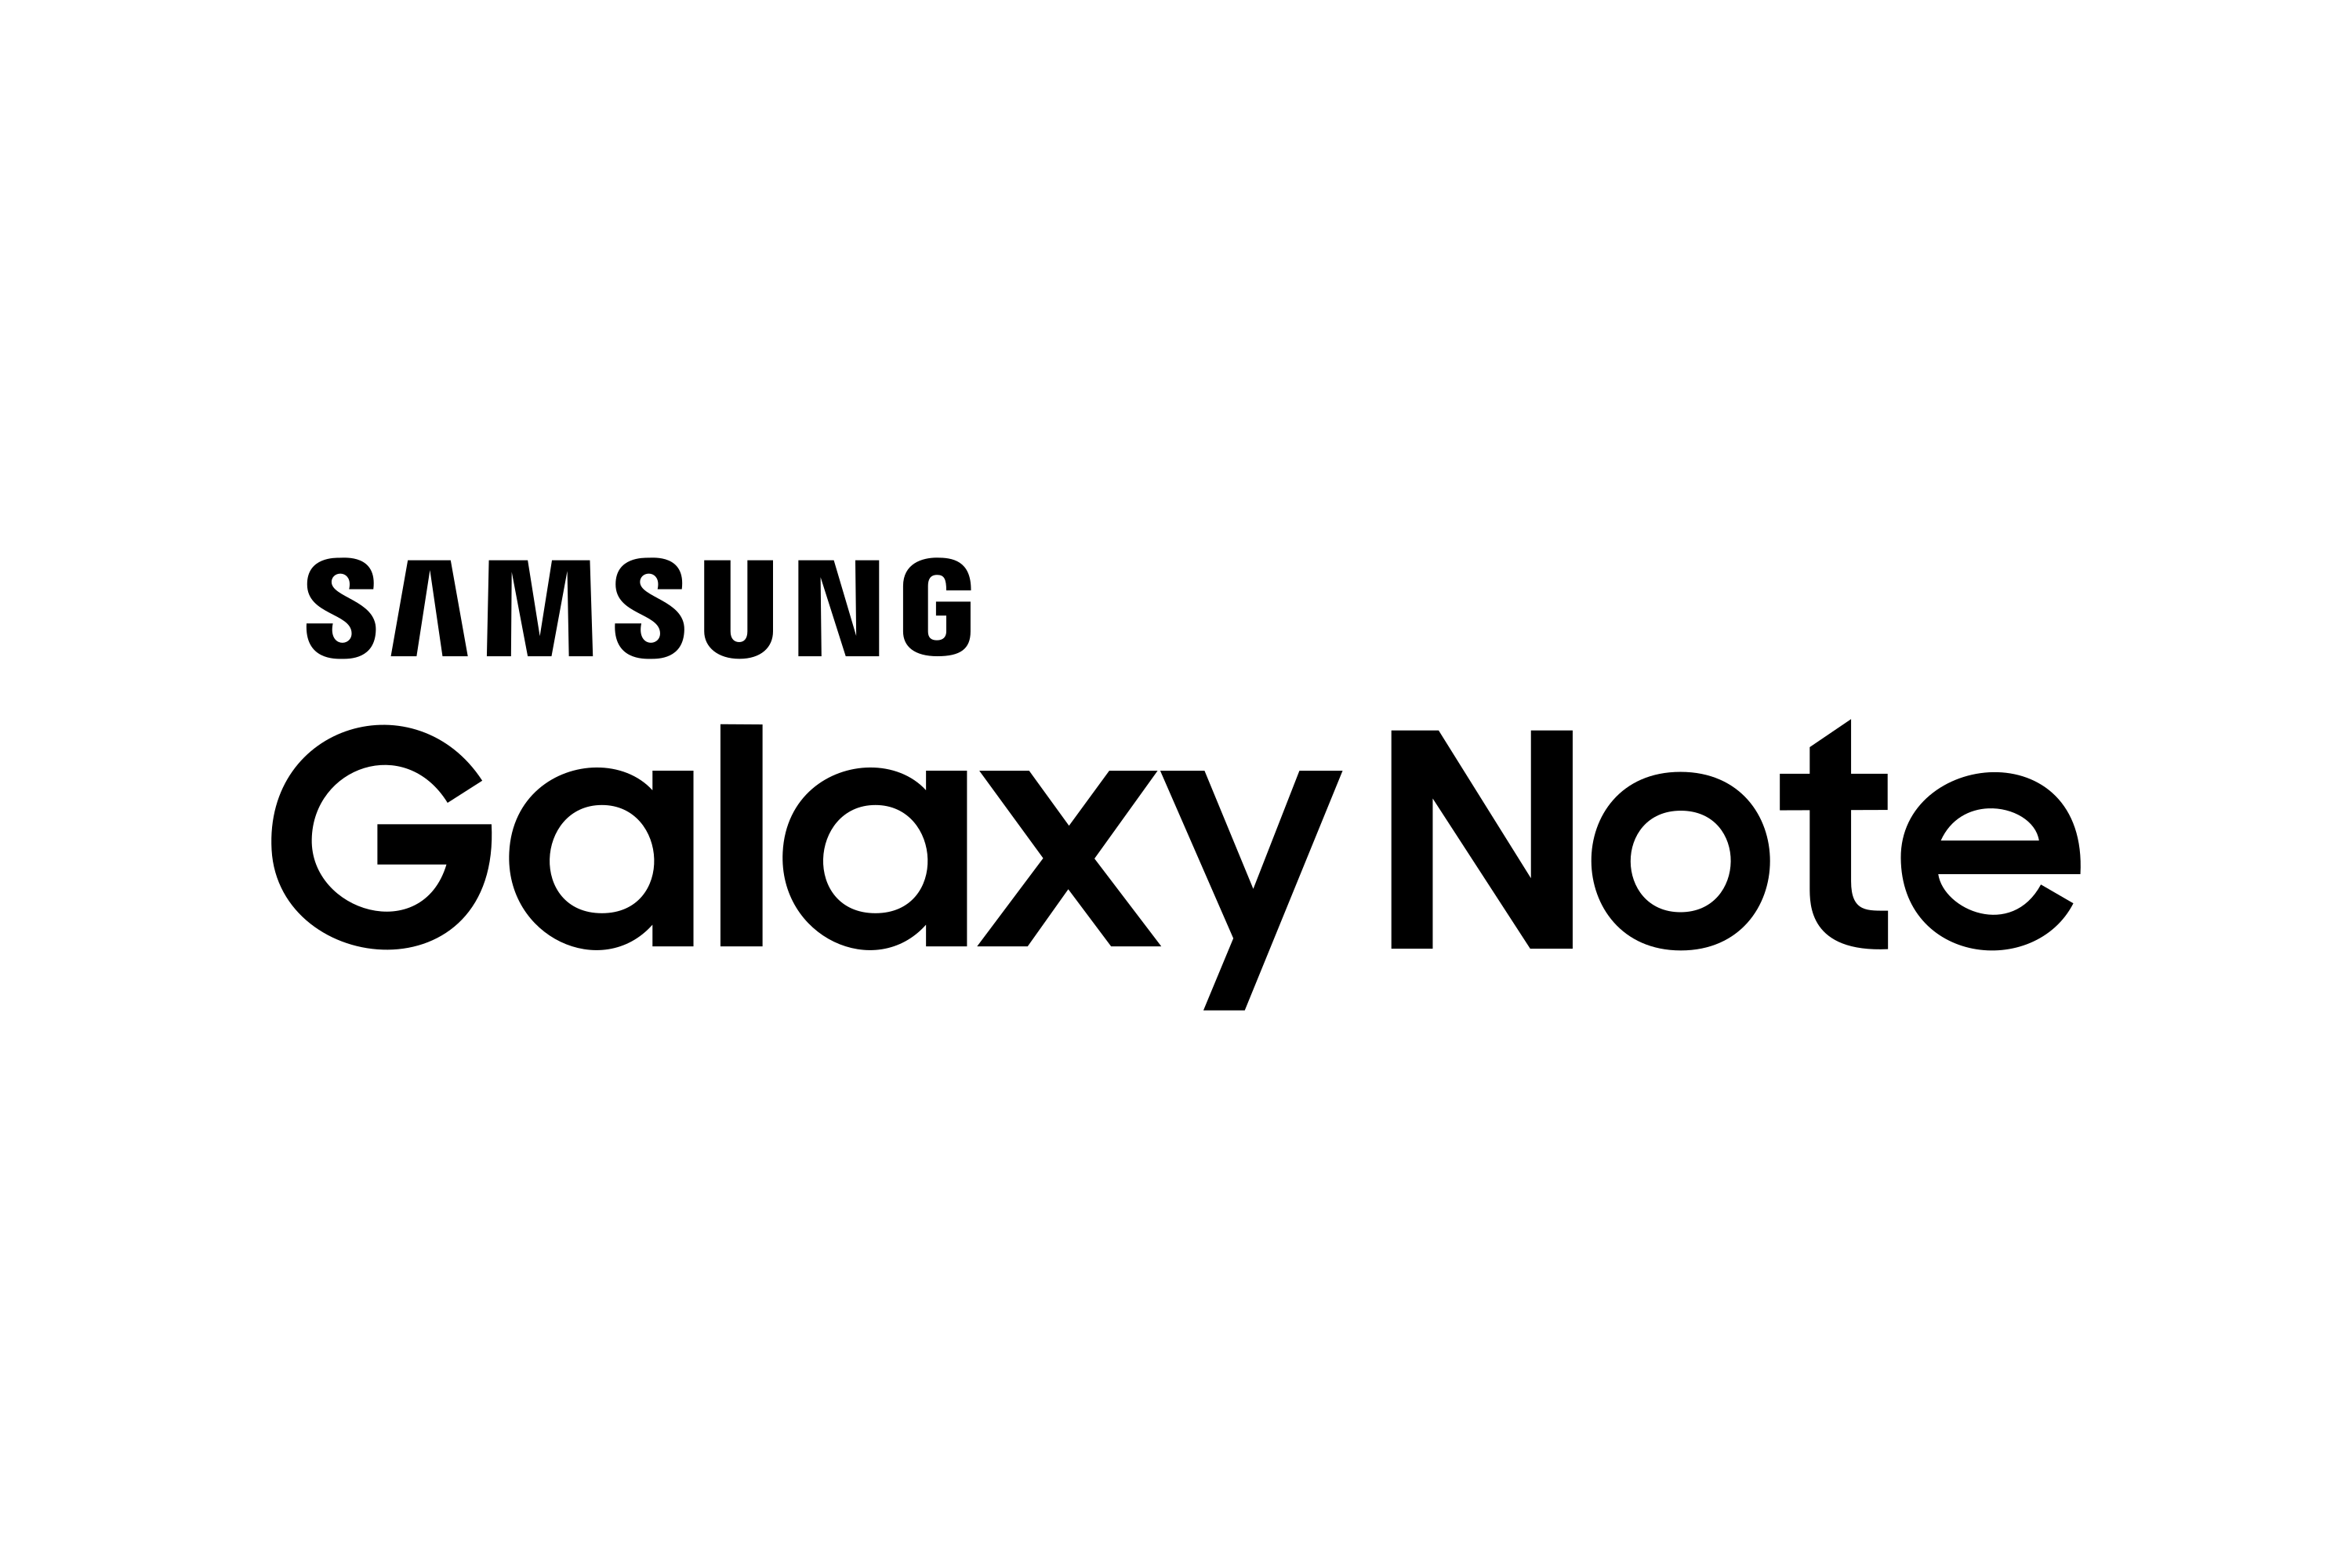 Download Samsung Galaxy Note series Logo in SVG Vector or PNG File Format -  Logo.wine